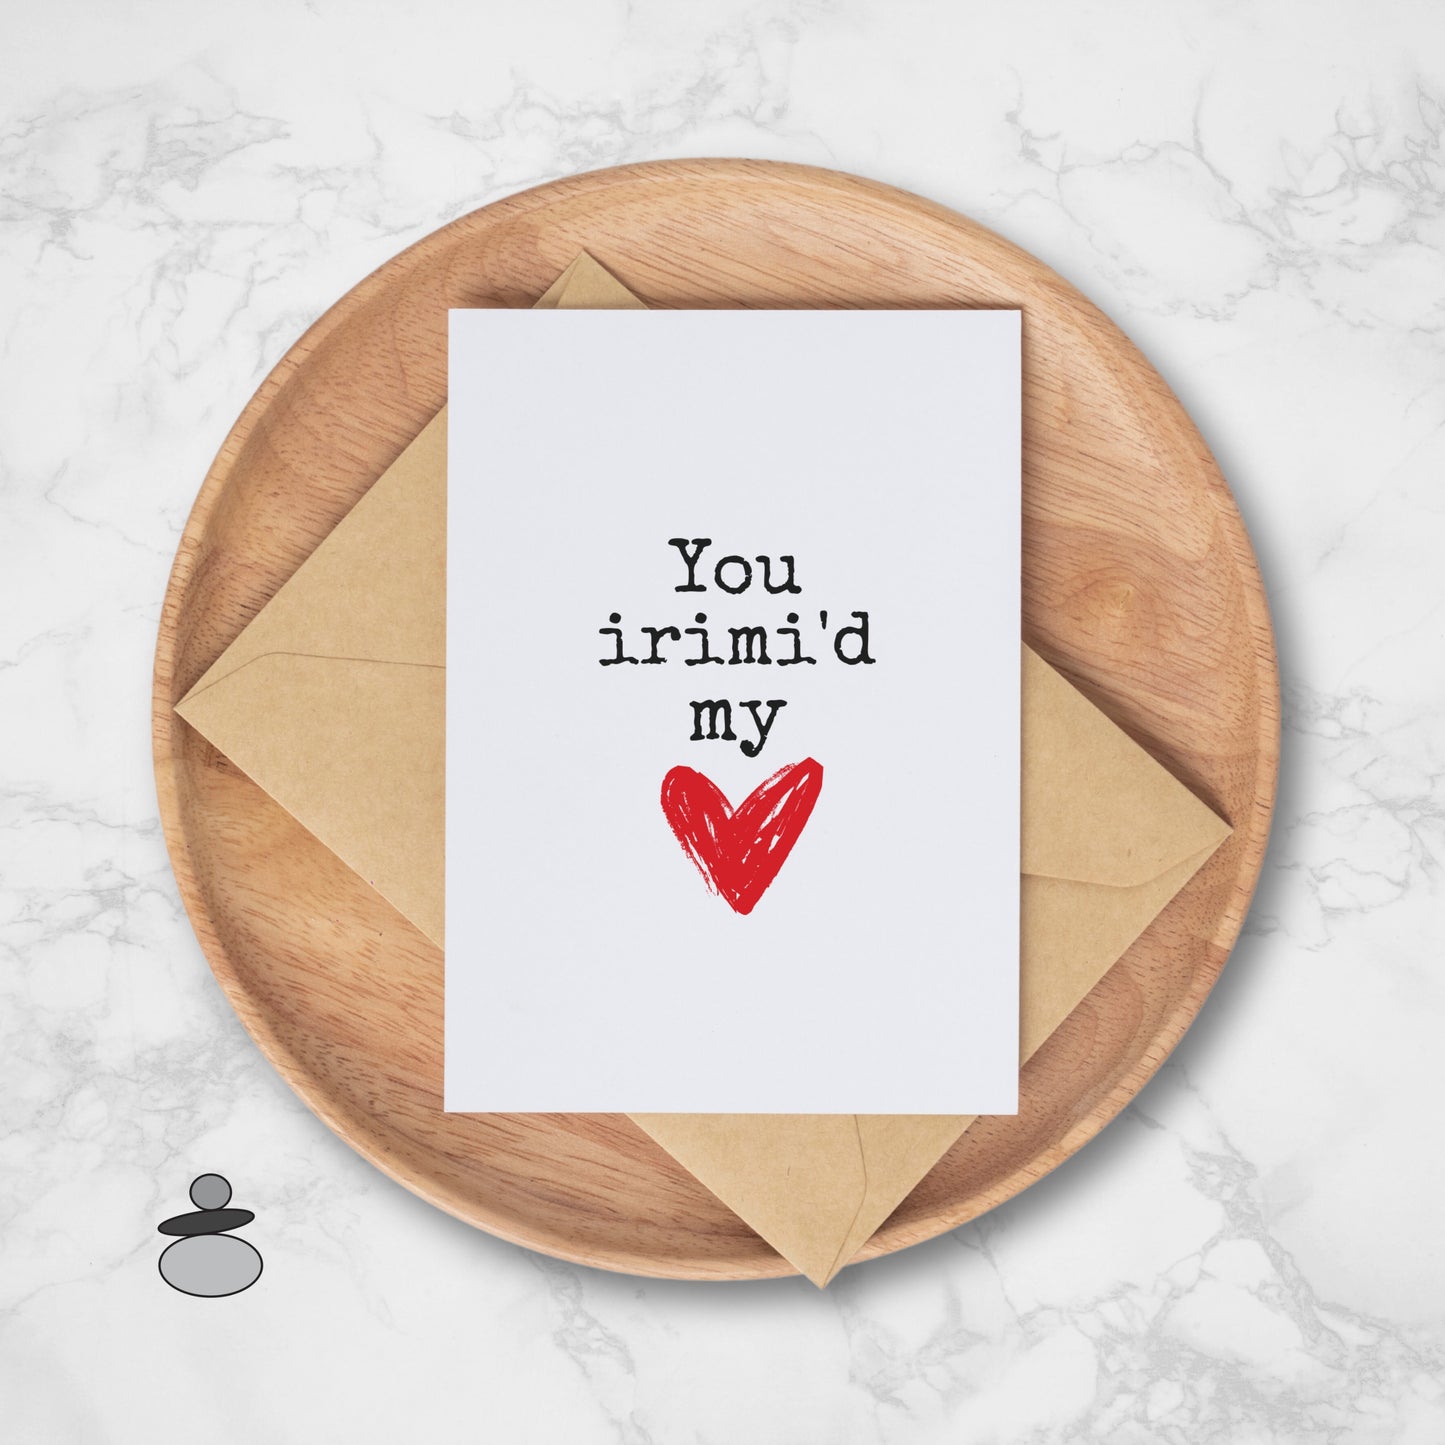 Aikido Valentine Greeting Card, Martial Arts, Irimi My Heart, Funny Pun